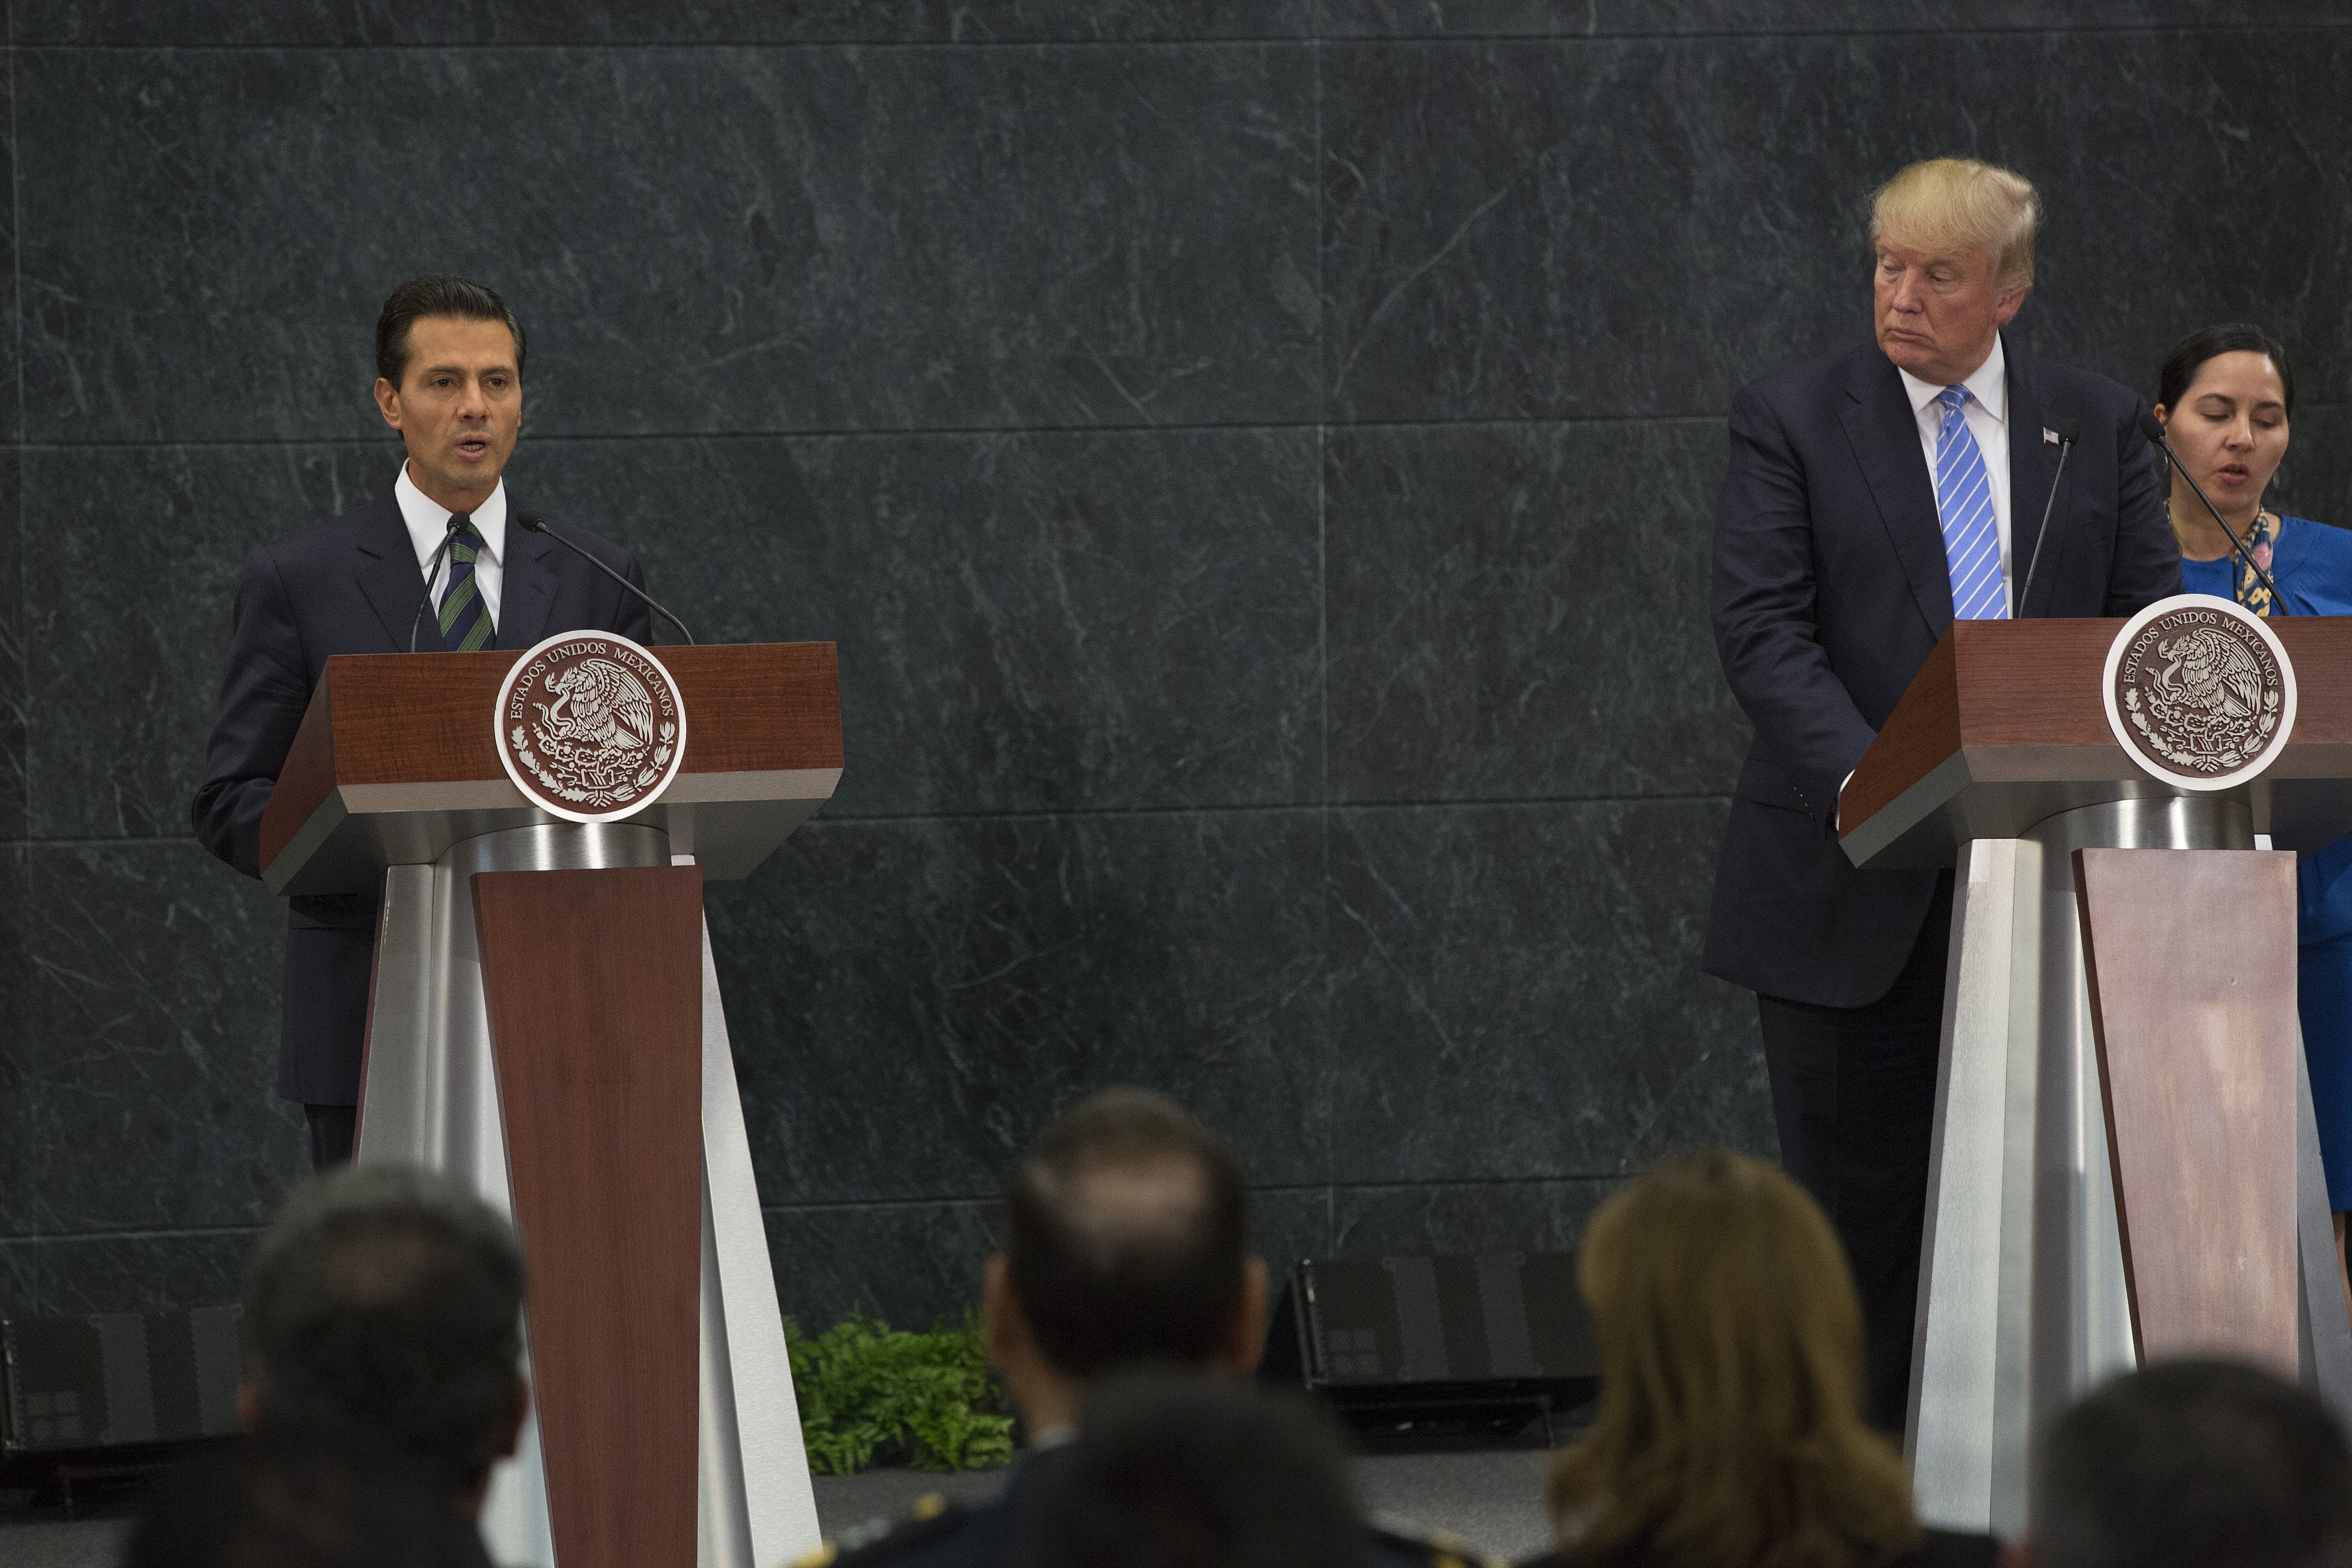 Enrique Pena Nieto, Mexico's president, left, speaks as Donald Trump, 2016 Republican presidential nominee, listens during a joint conference in Mexico City, Mexico, on Wednesday, Aug. 31, 2016. Bloomberg&mdash;Bloomberg via Getty Images (Bloomberg&mdash;Bloomberg via Getty Images)